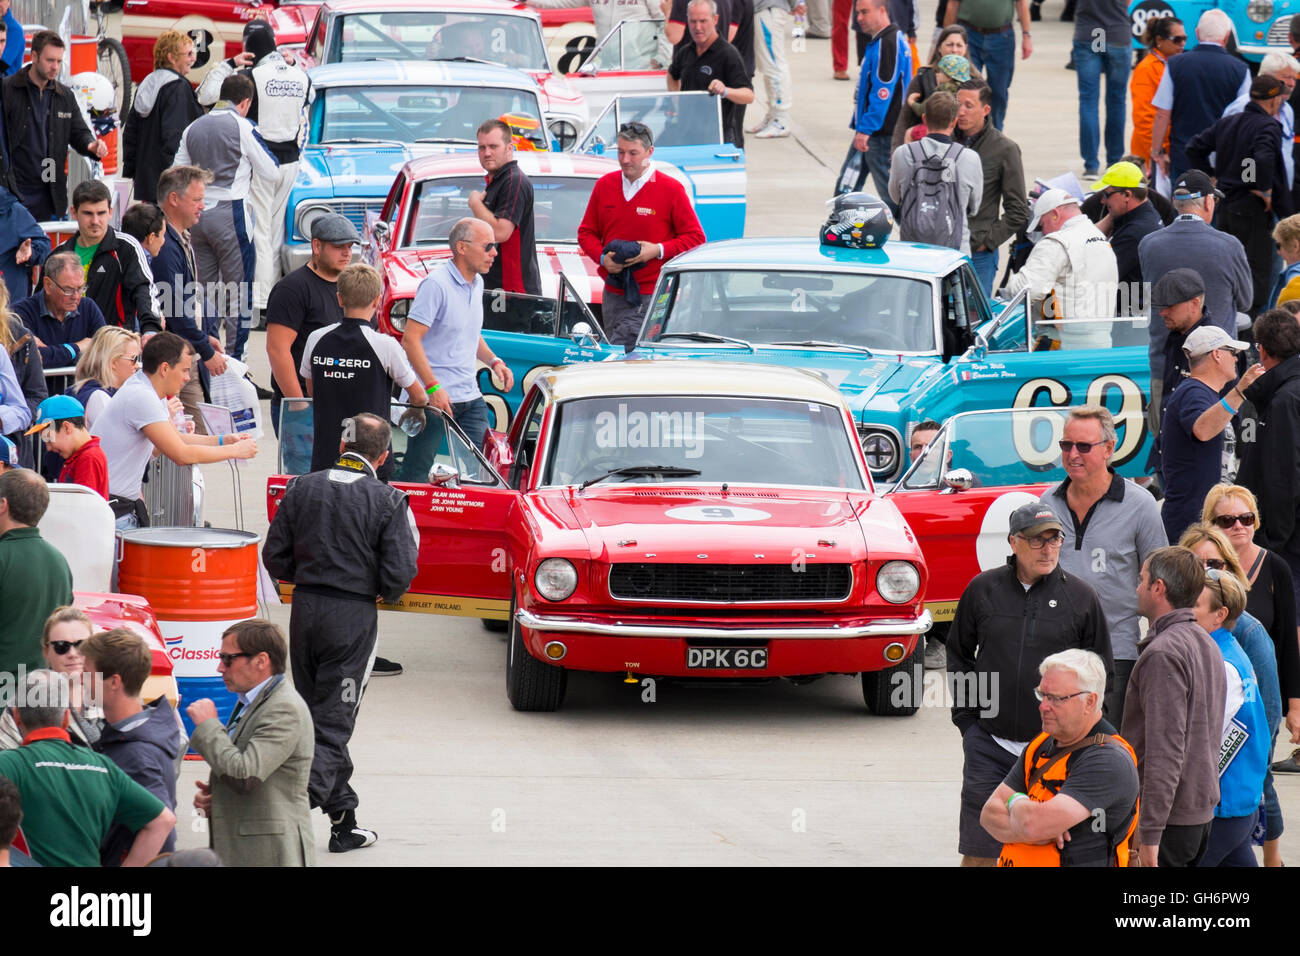 A Ford Mustang at the front of a line of classic touring cars in the paddock at the annual Silverstone Classic event, UK Stock Photo